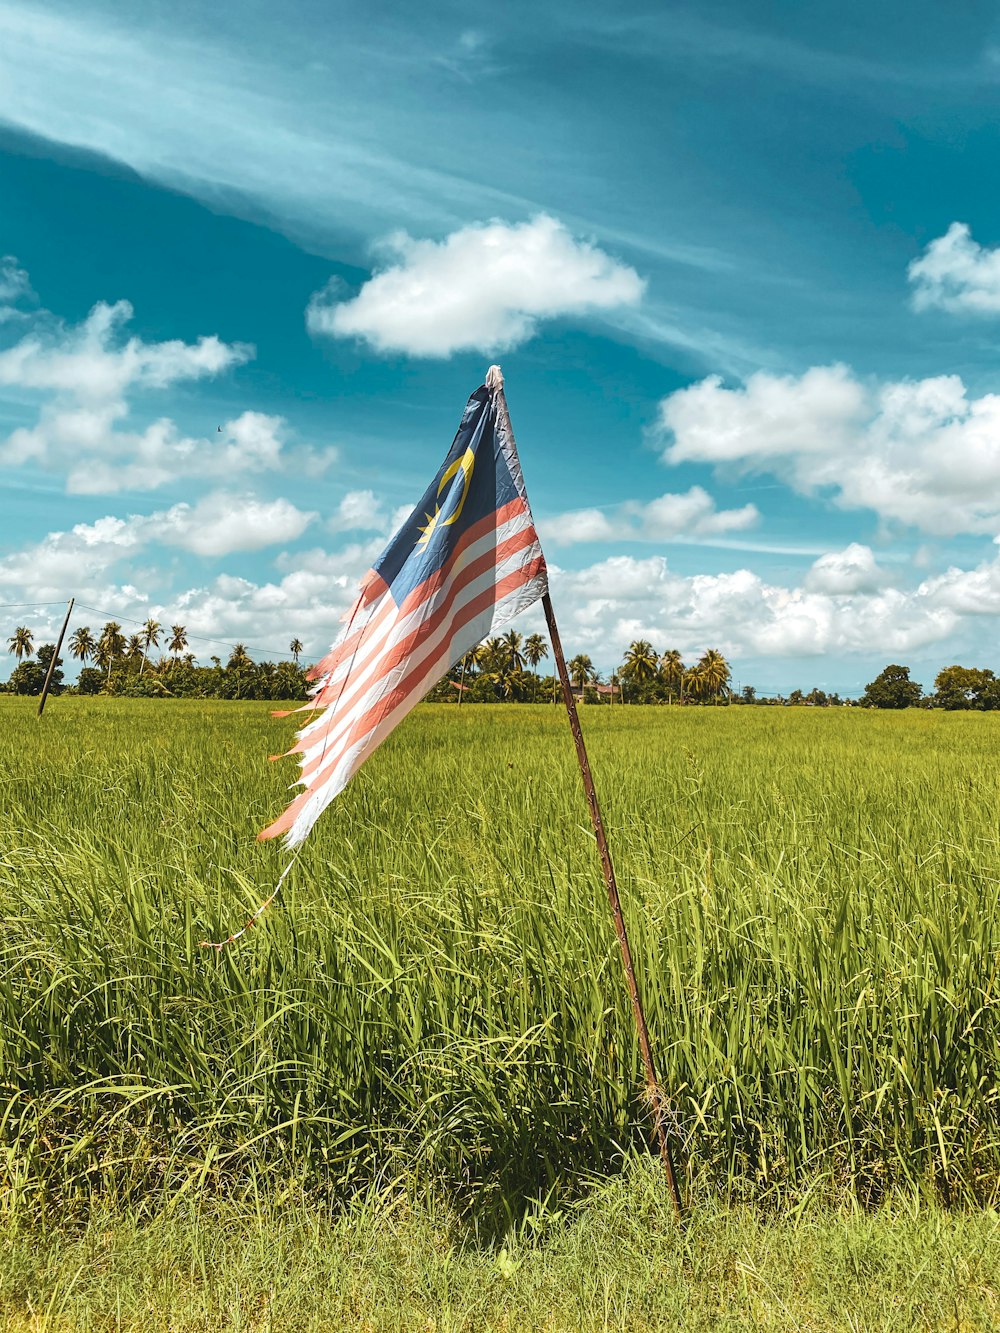 us a flag on green grass field under blue and white cloudy sky during daytime